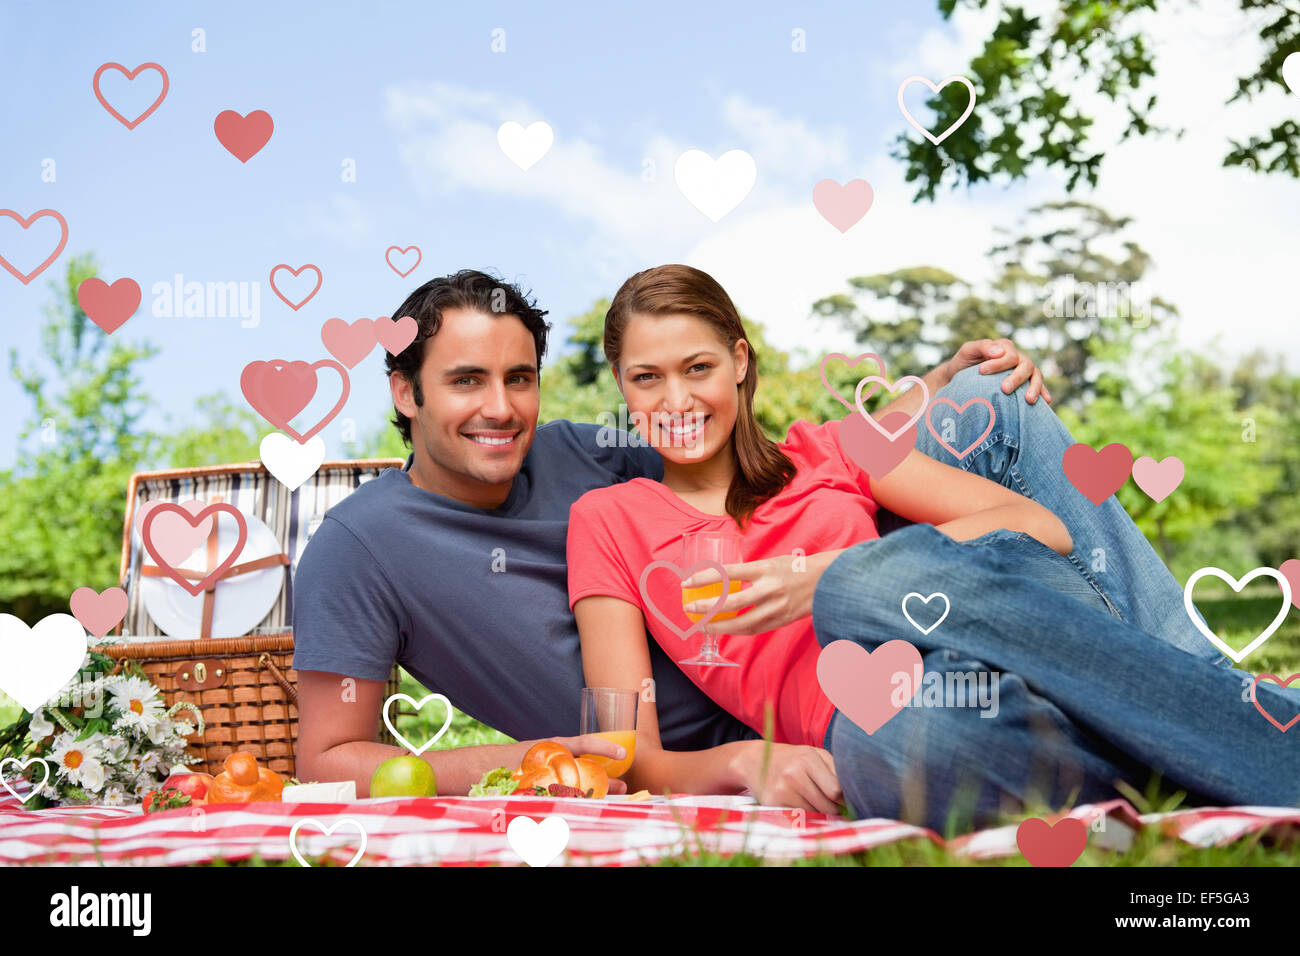 Composite image of two friends looking ahead while they hold glasses as they lie on a blanket Stock Photo